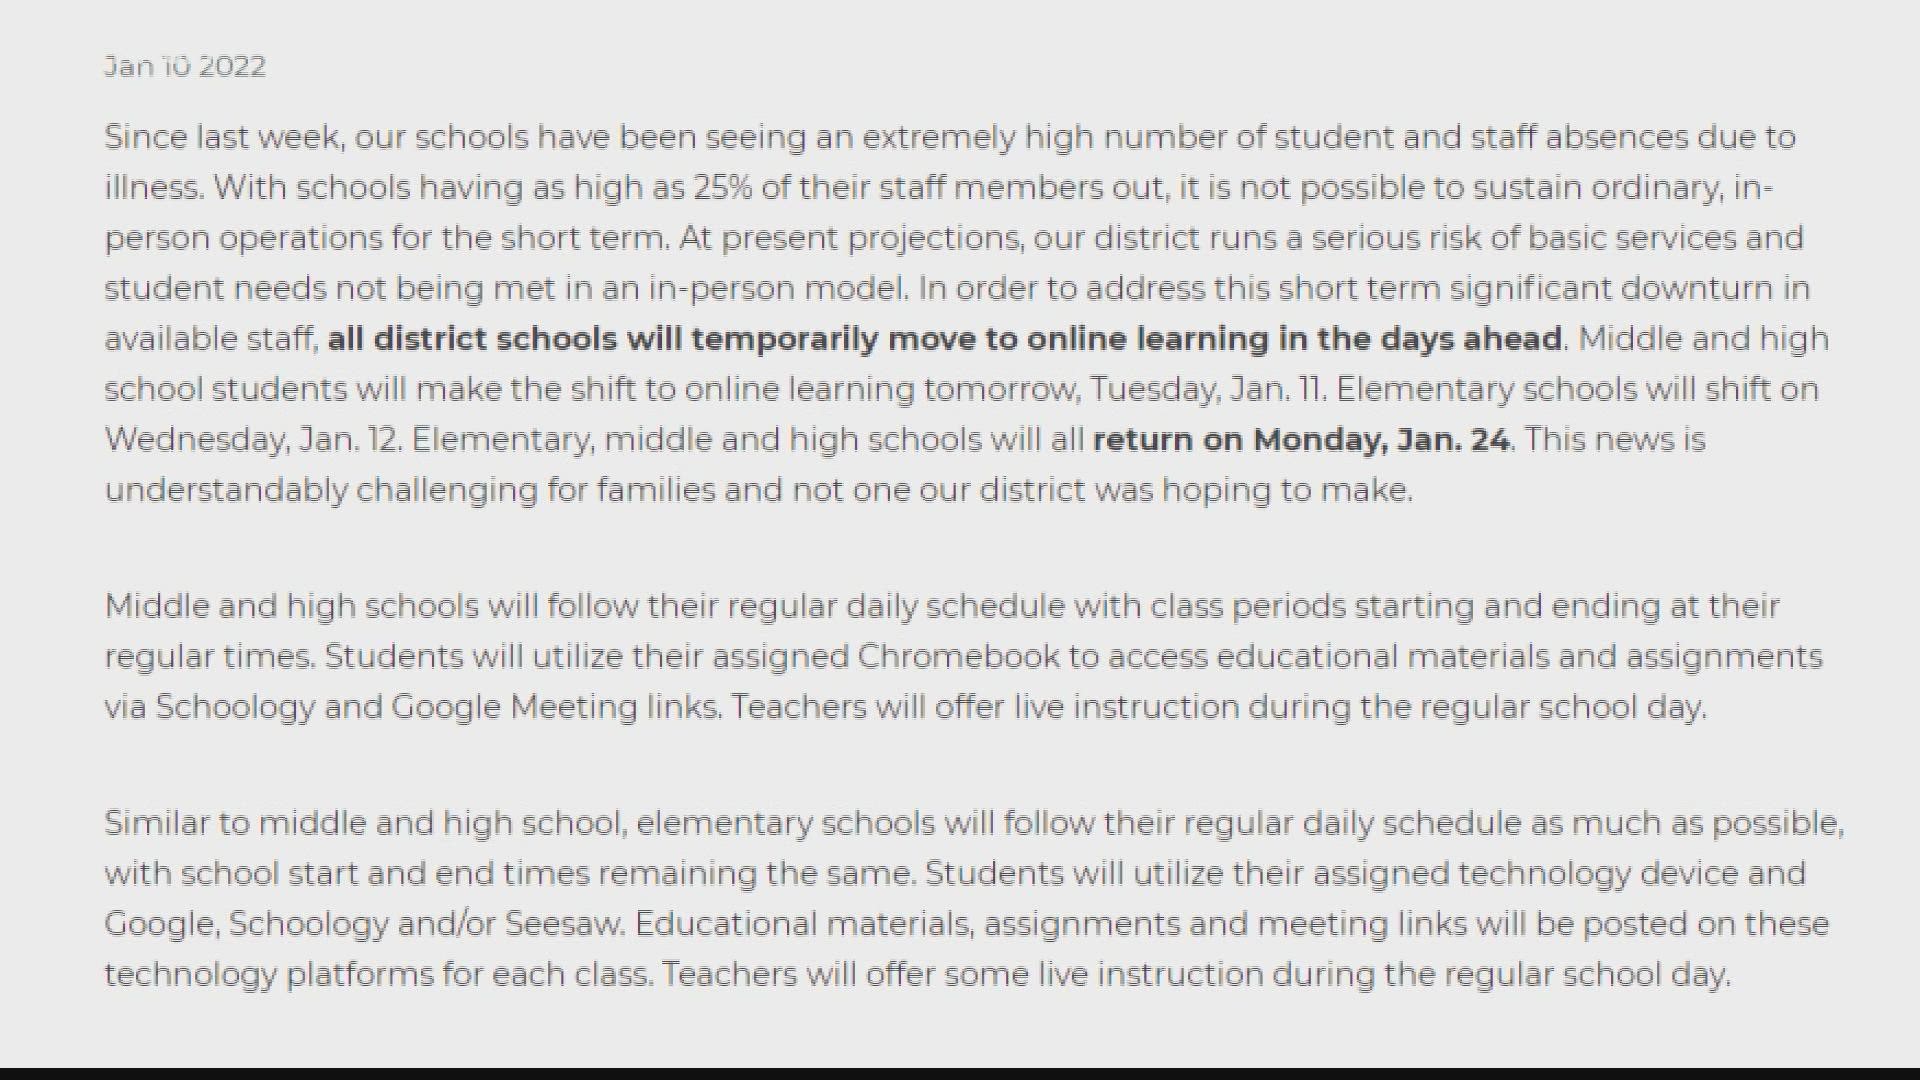 A high number of illnesses are forcing the district into online classes until Jan. 24.